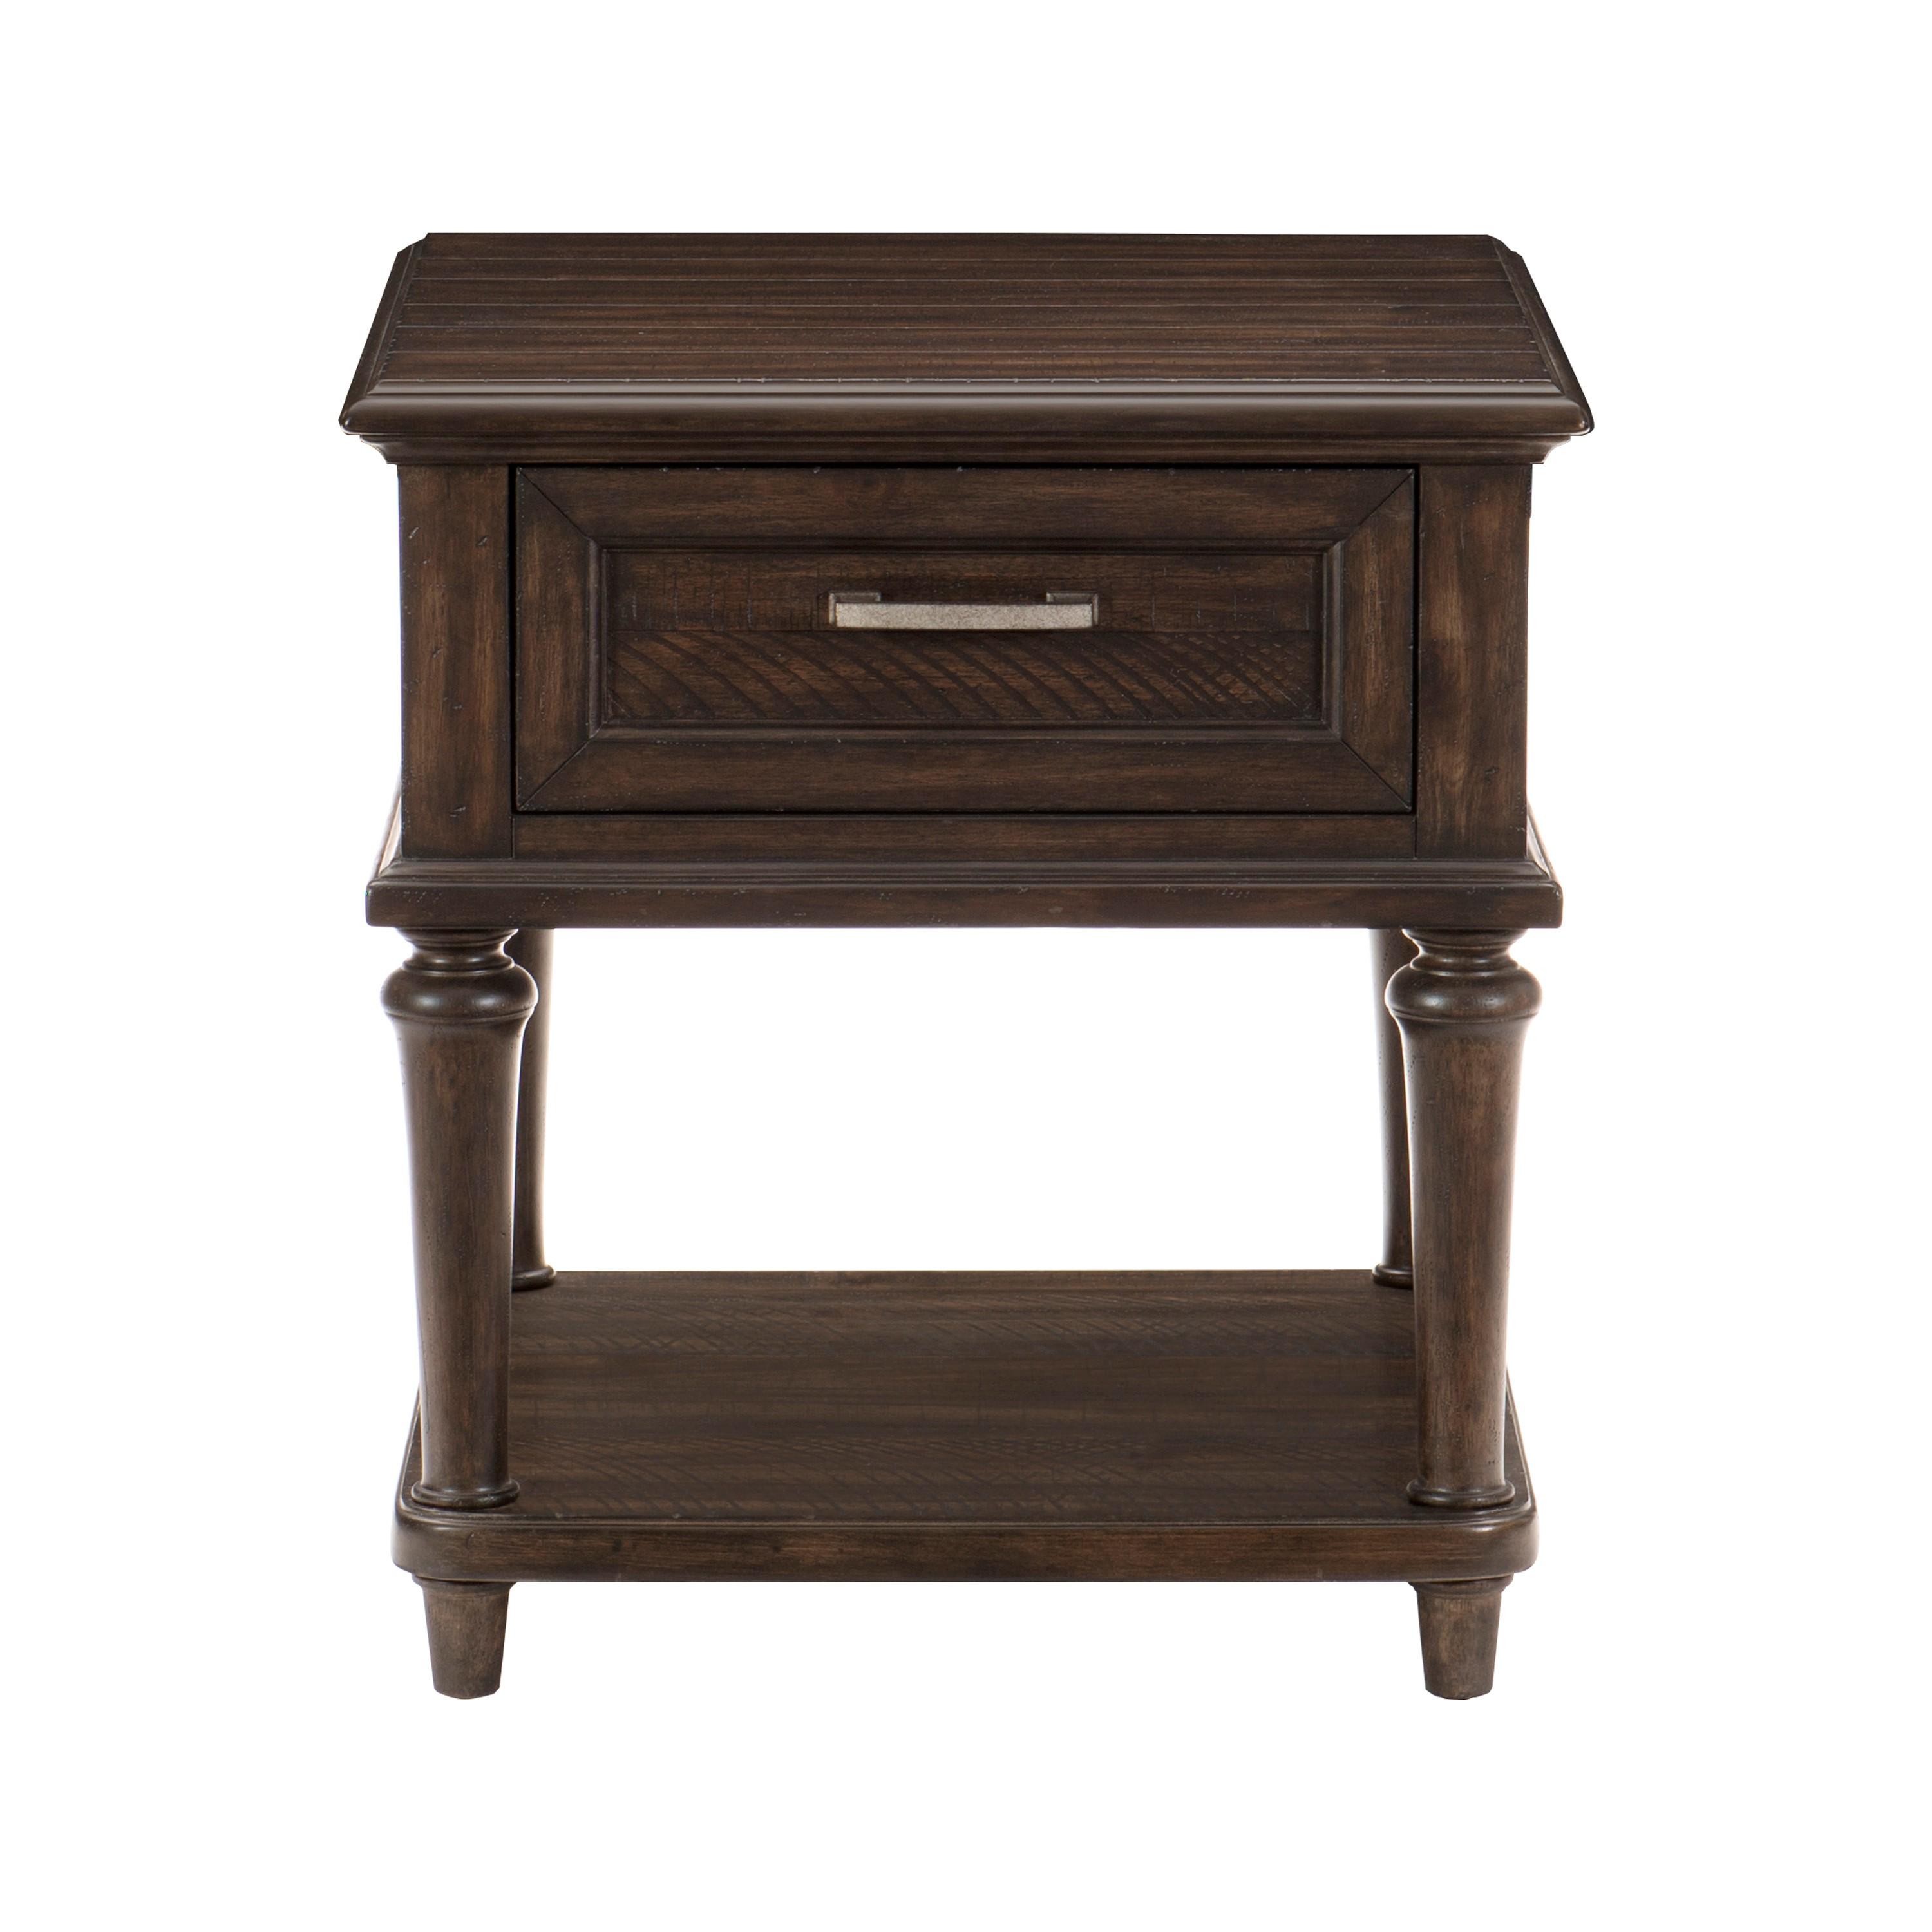 Transitional End Table 1689-04 Cardano 1689-04 in Charcoal 